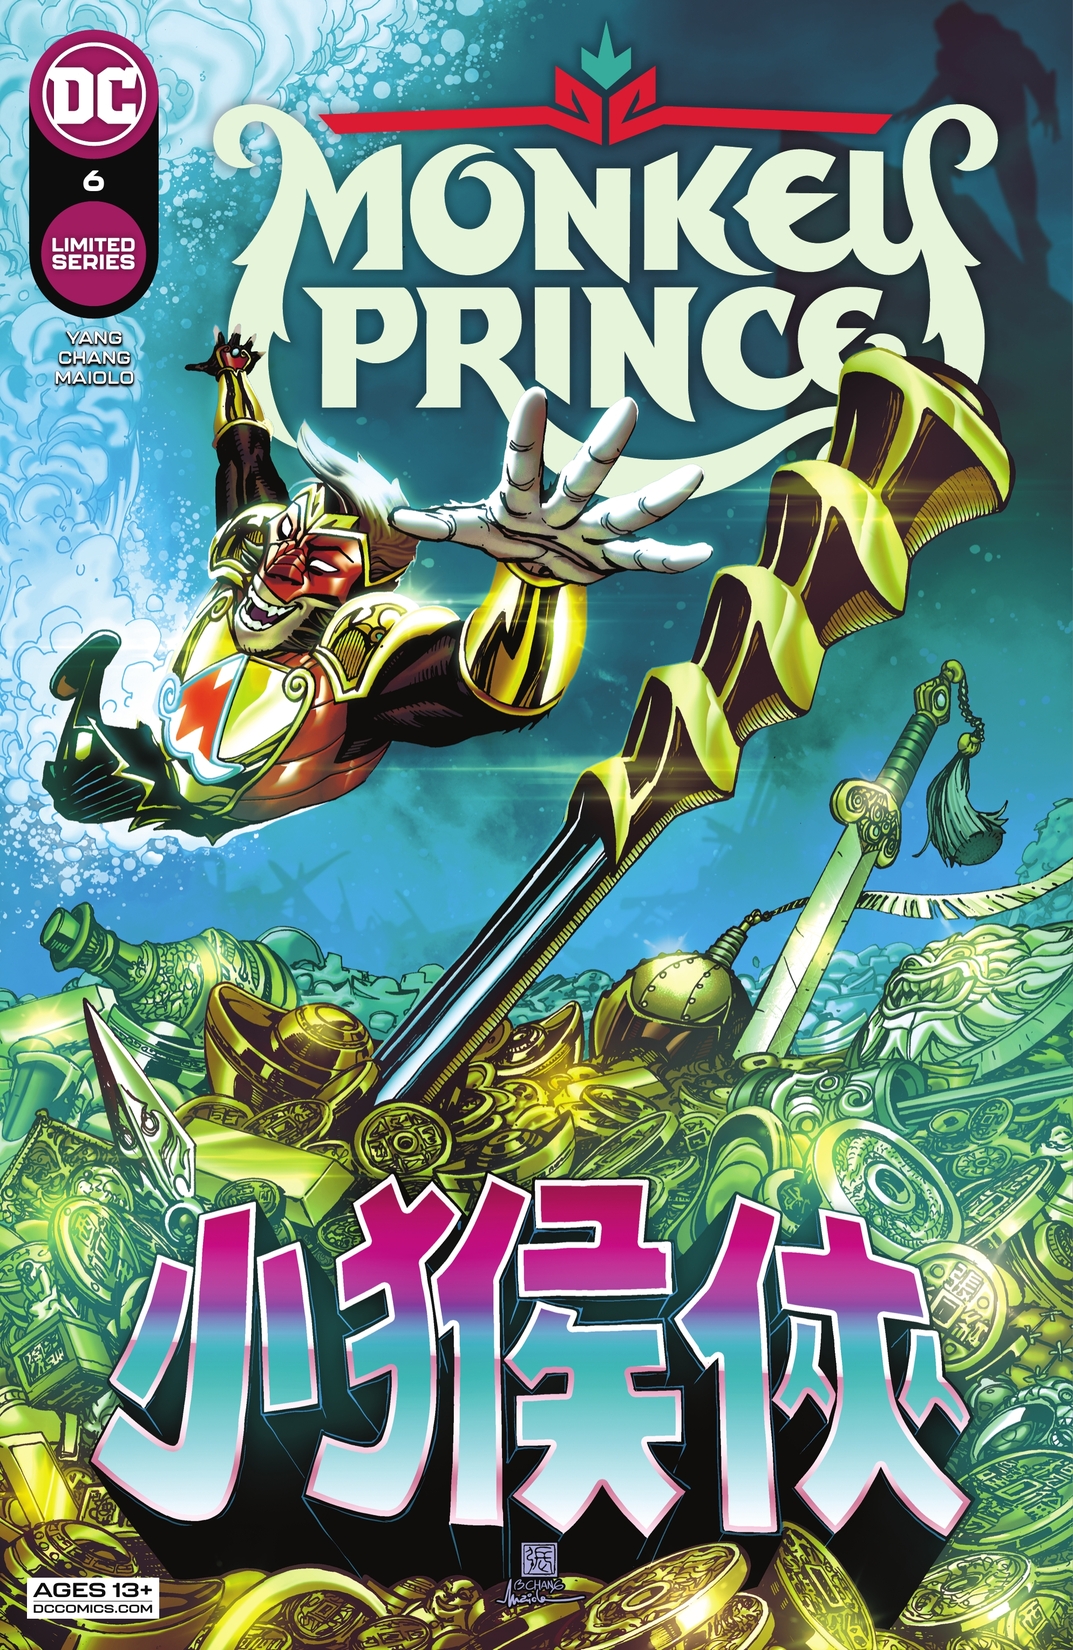 Monkey Prince #6 preview images